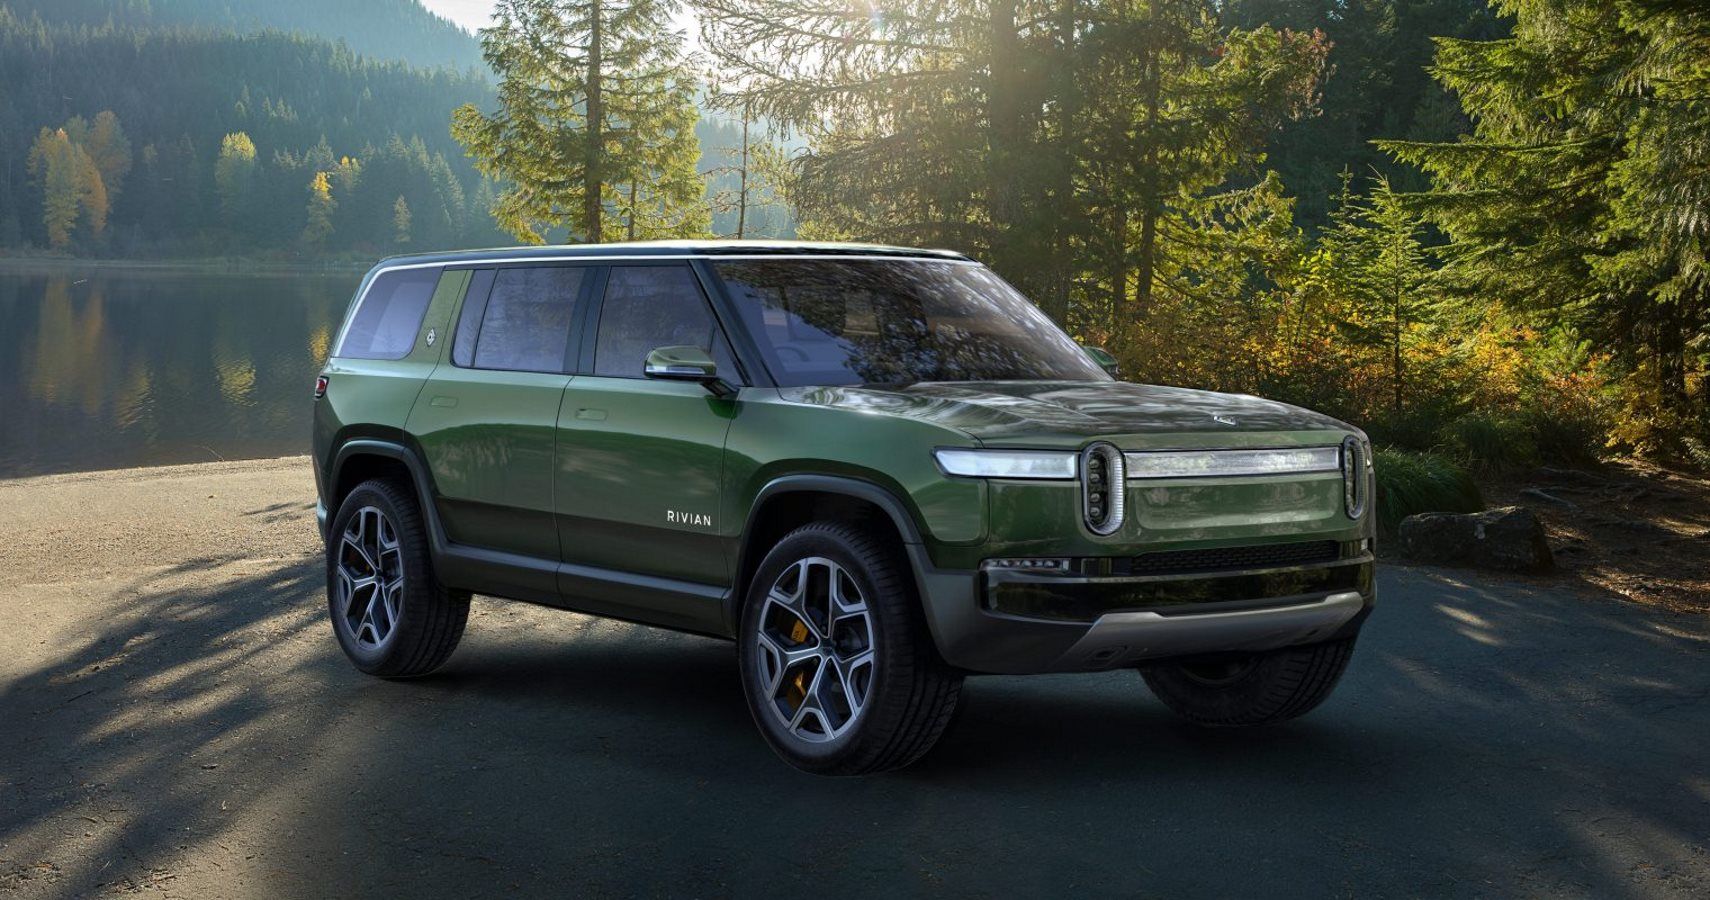 Rivian’s New Electric SUV Packs Huge Battery